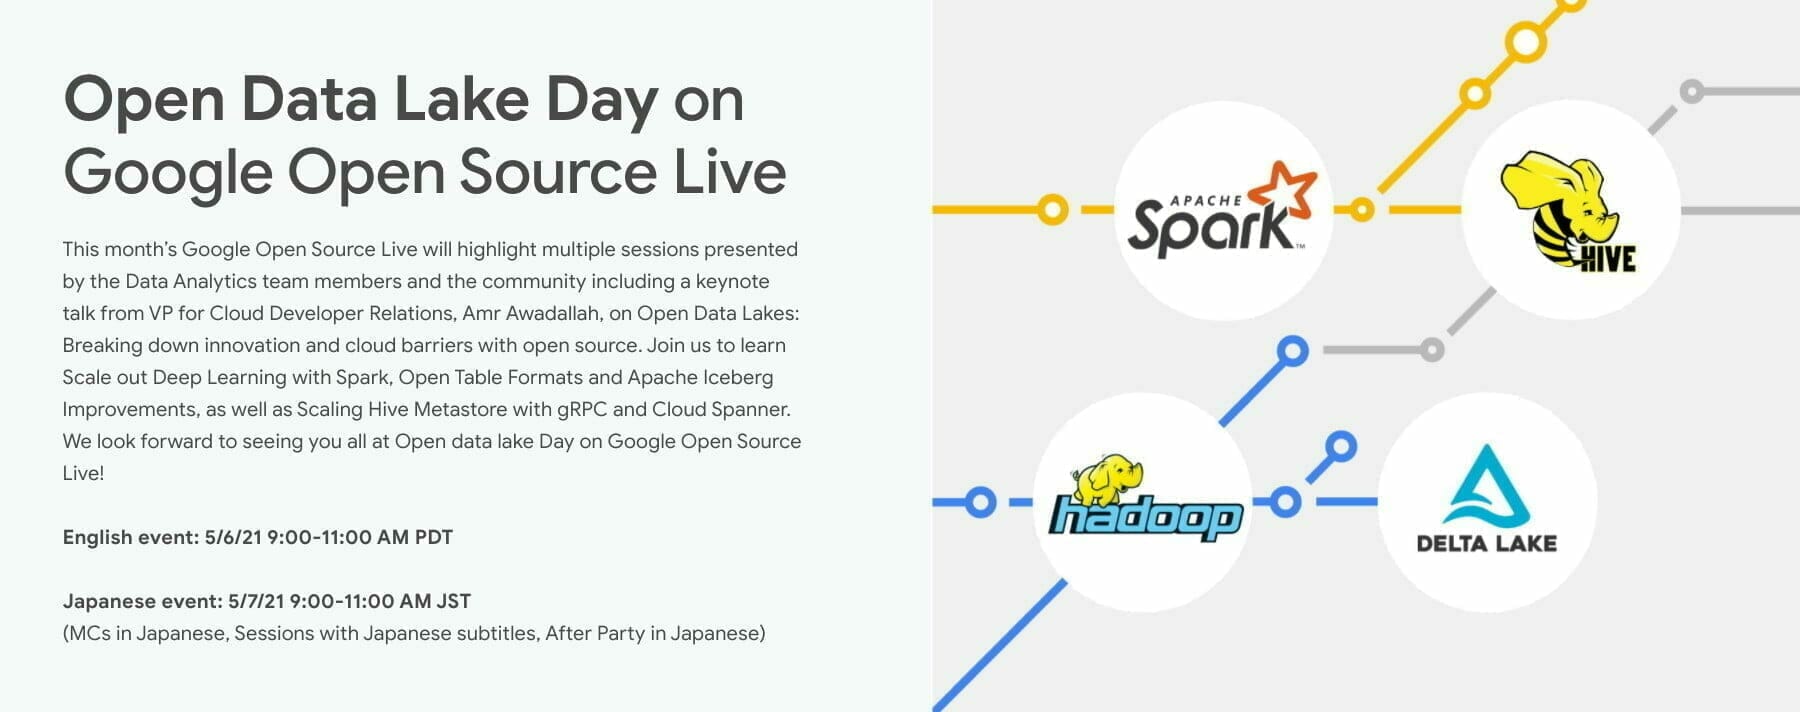 [Google Open Source] Open Data Lake Day on Google Open Source Live